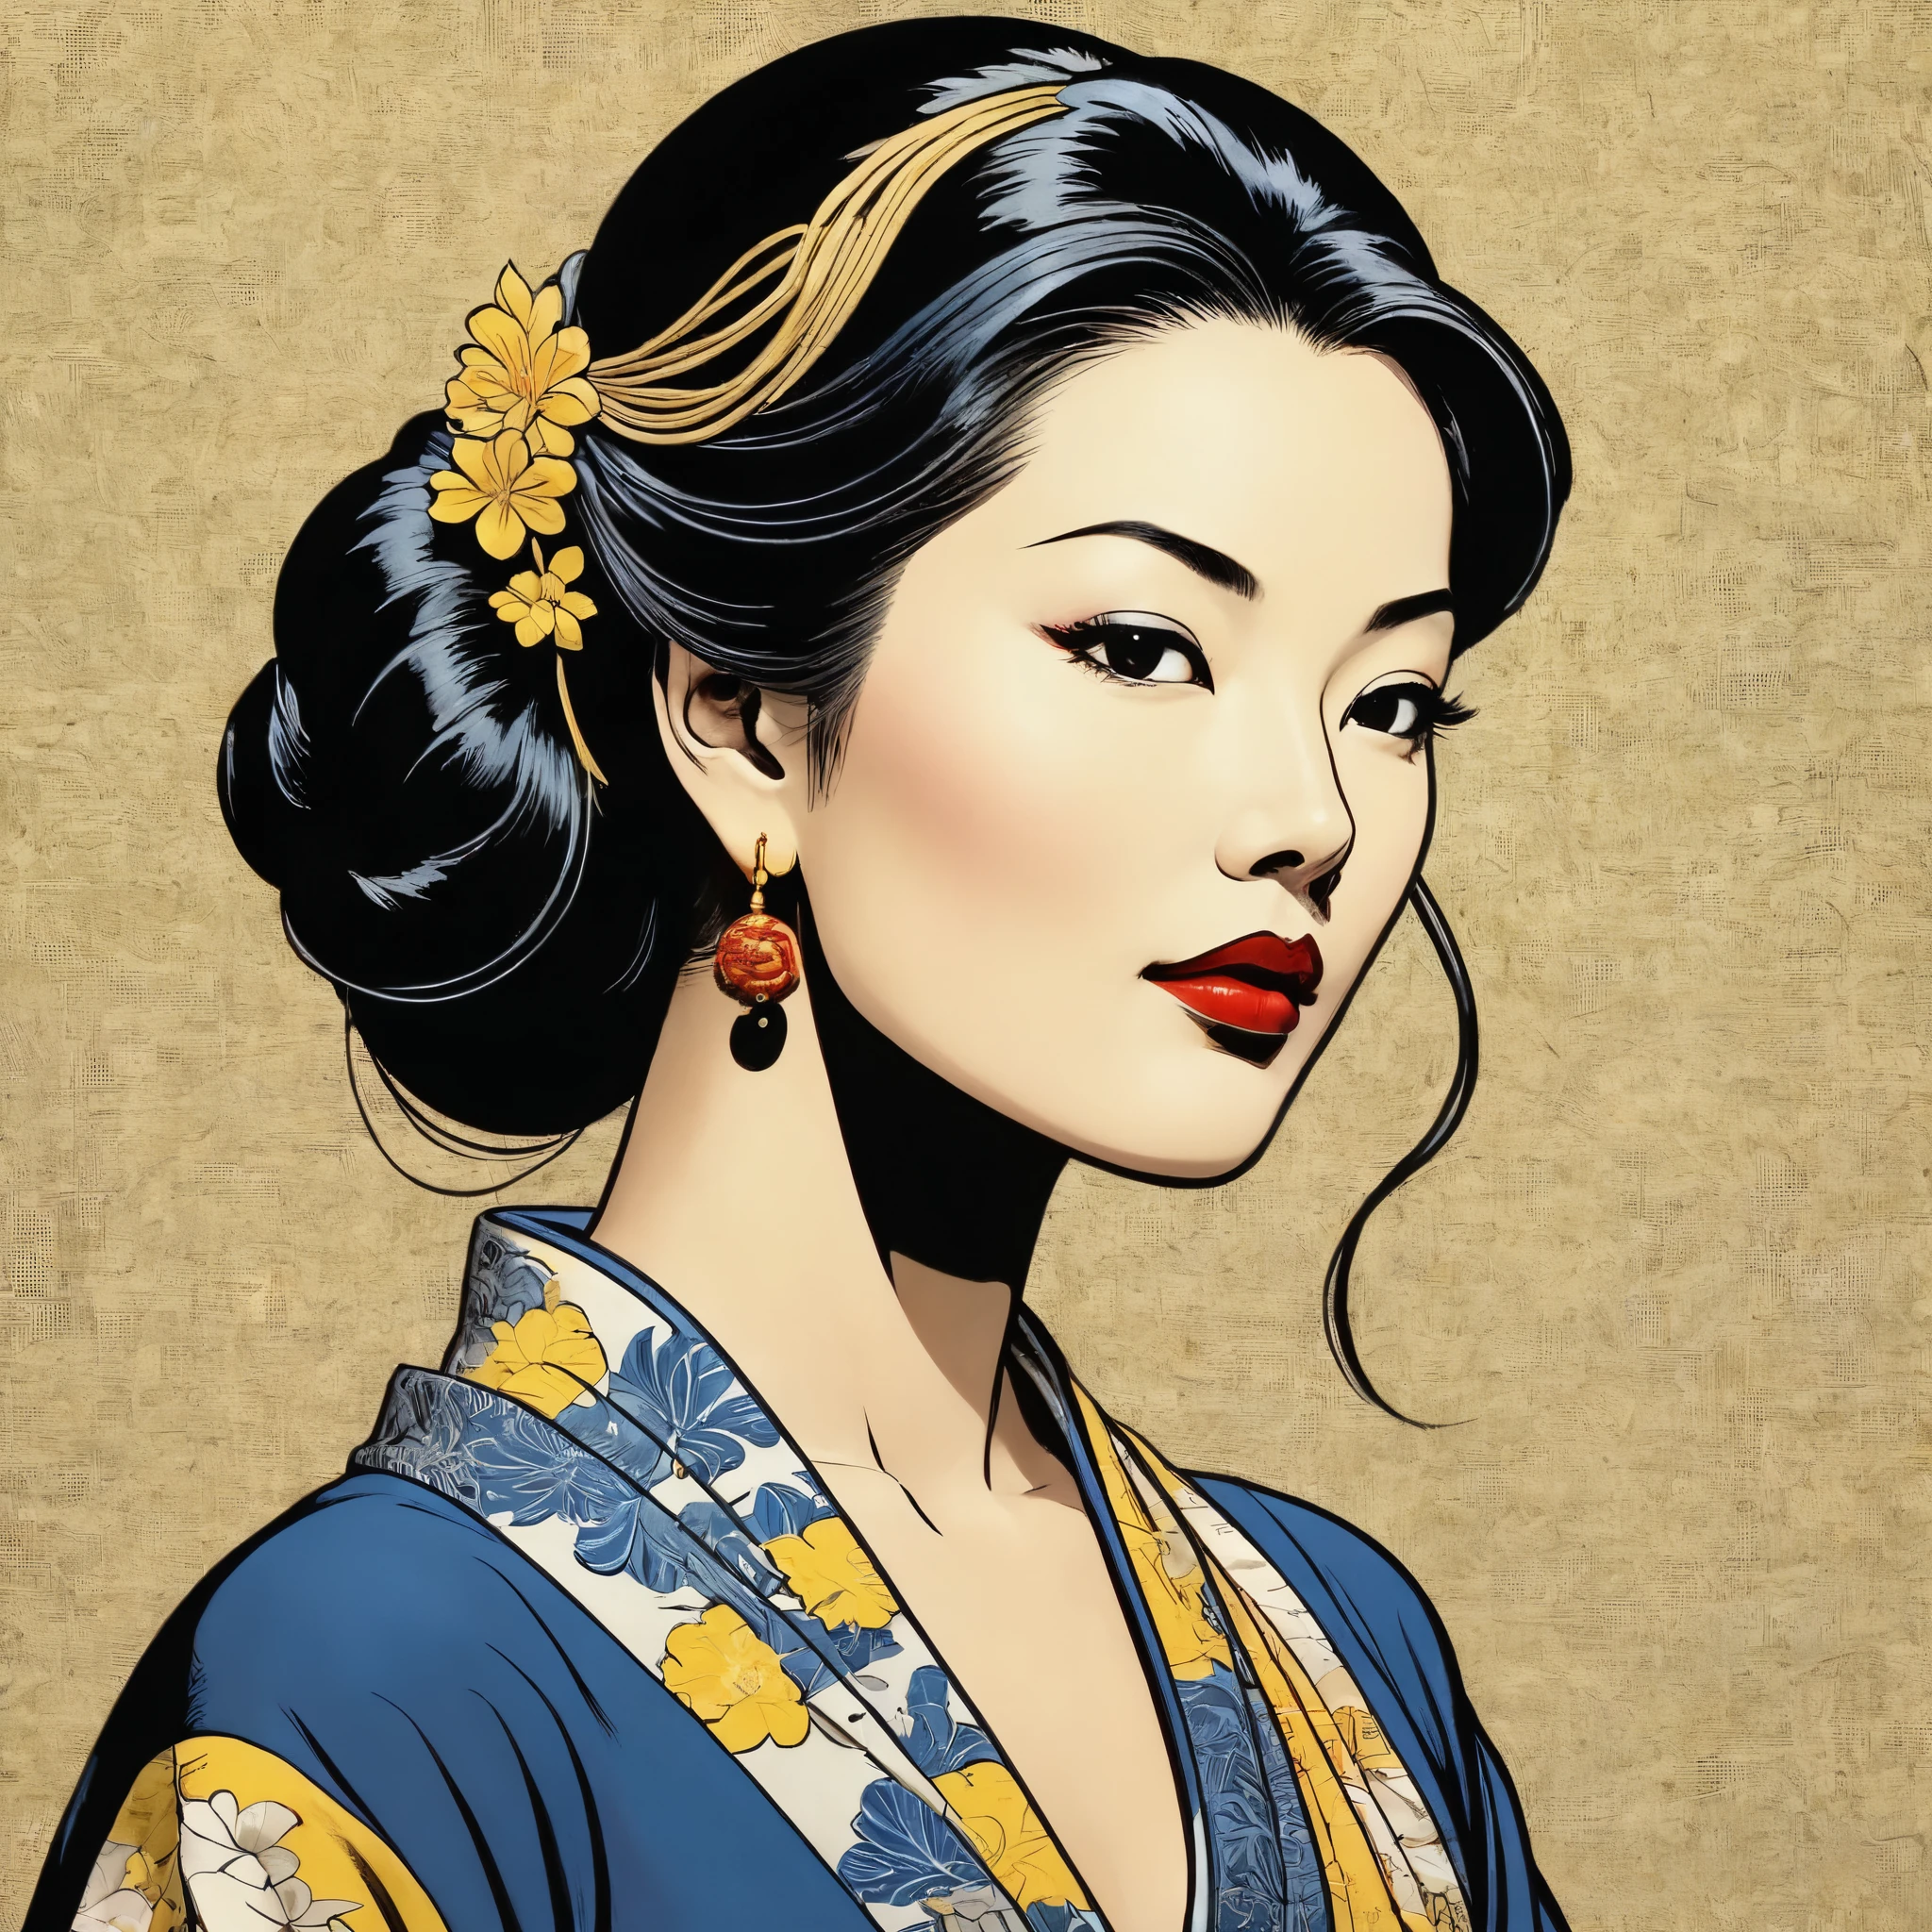 Visible full silhouette of a woman in a graceful pose with a serene and contemplative expression. The woman is a combination of nobility and serenity in some East Asian cultures. The woman's hair is long but tied up arranged in a traditional hairstyle. The hair accessories are elaborate, adding a sense of elegance and sophistication. Style by Roy Lichtenstein. Comic book art, perfect, smooth.